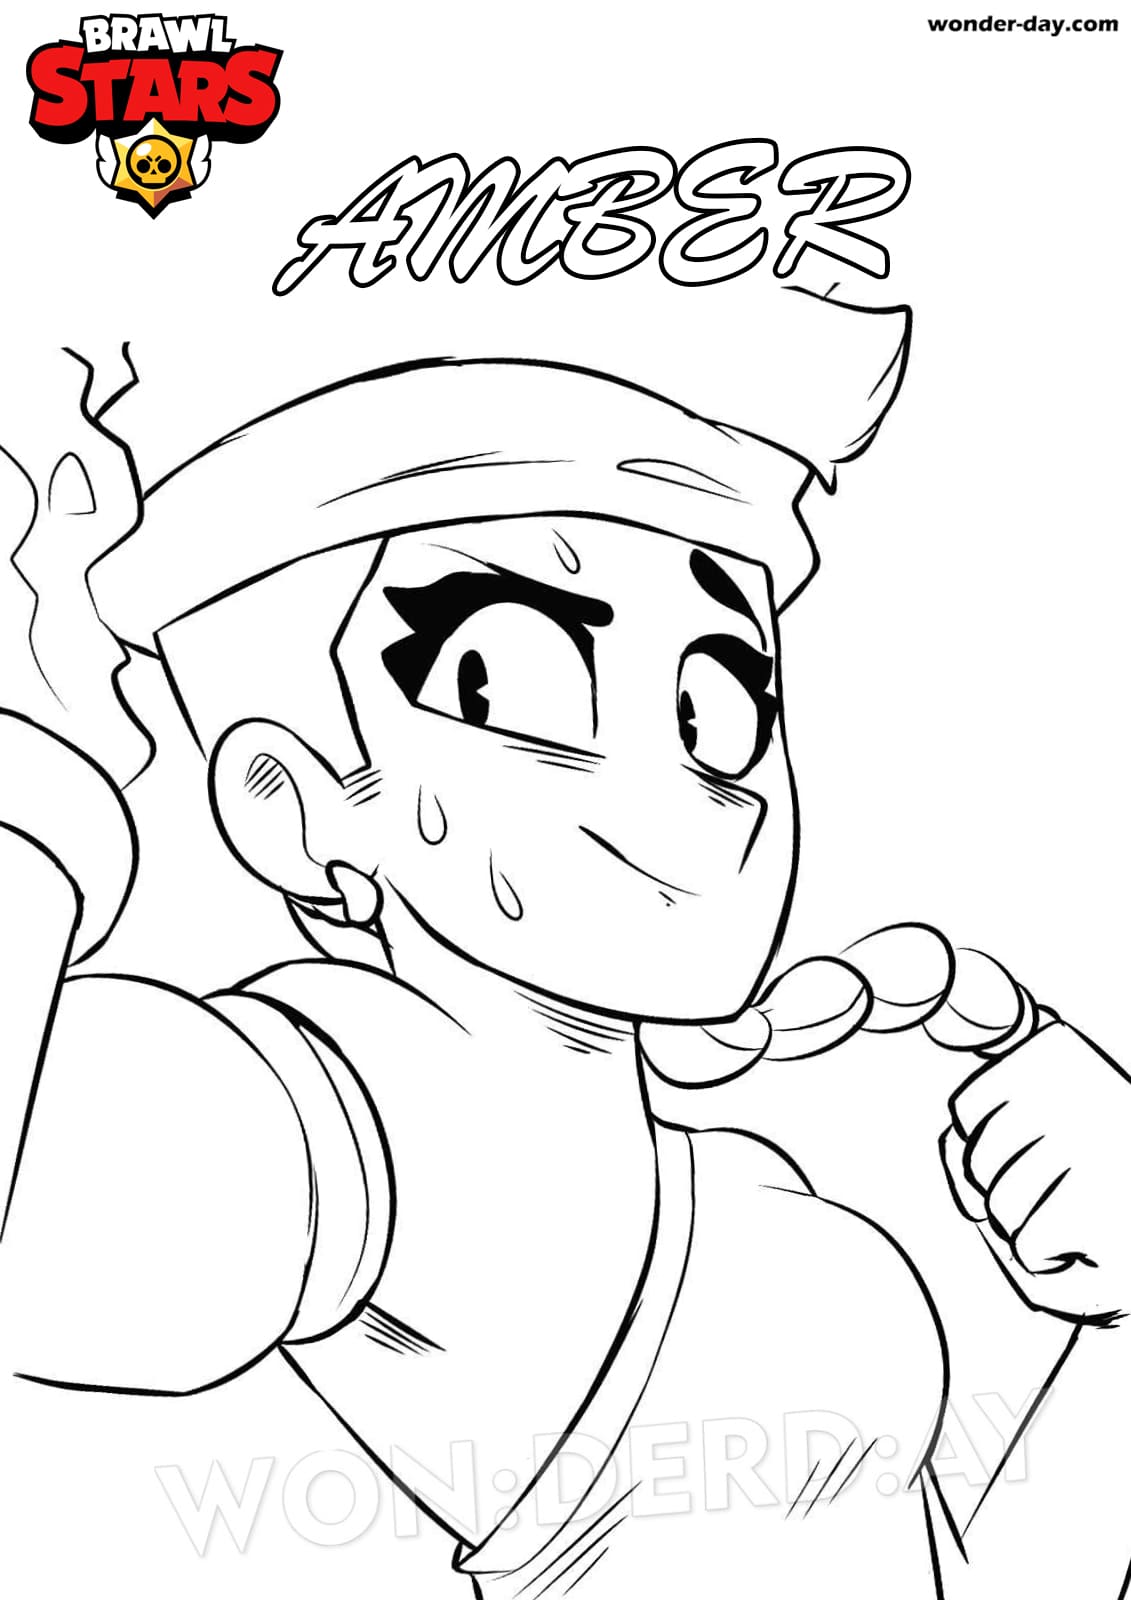 Amber Brawl Stars Coloring Pages Print A New Brawler - brawlers dibujos de brawl stars para colorear